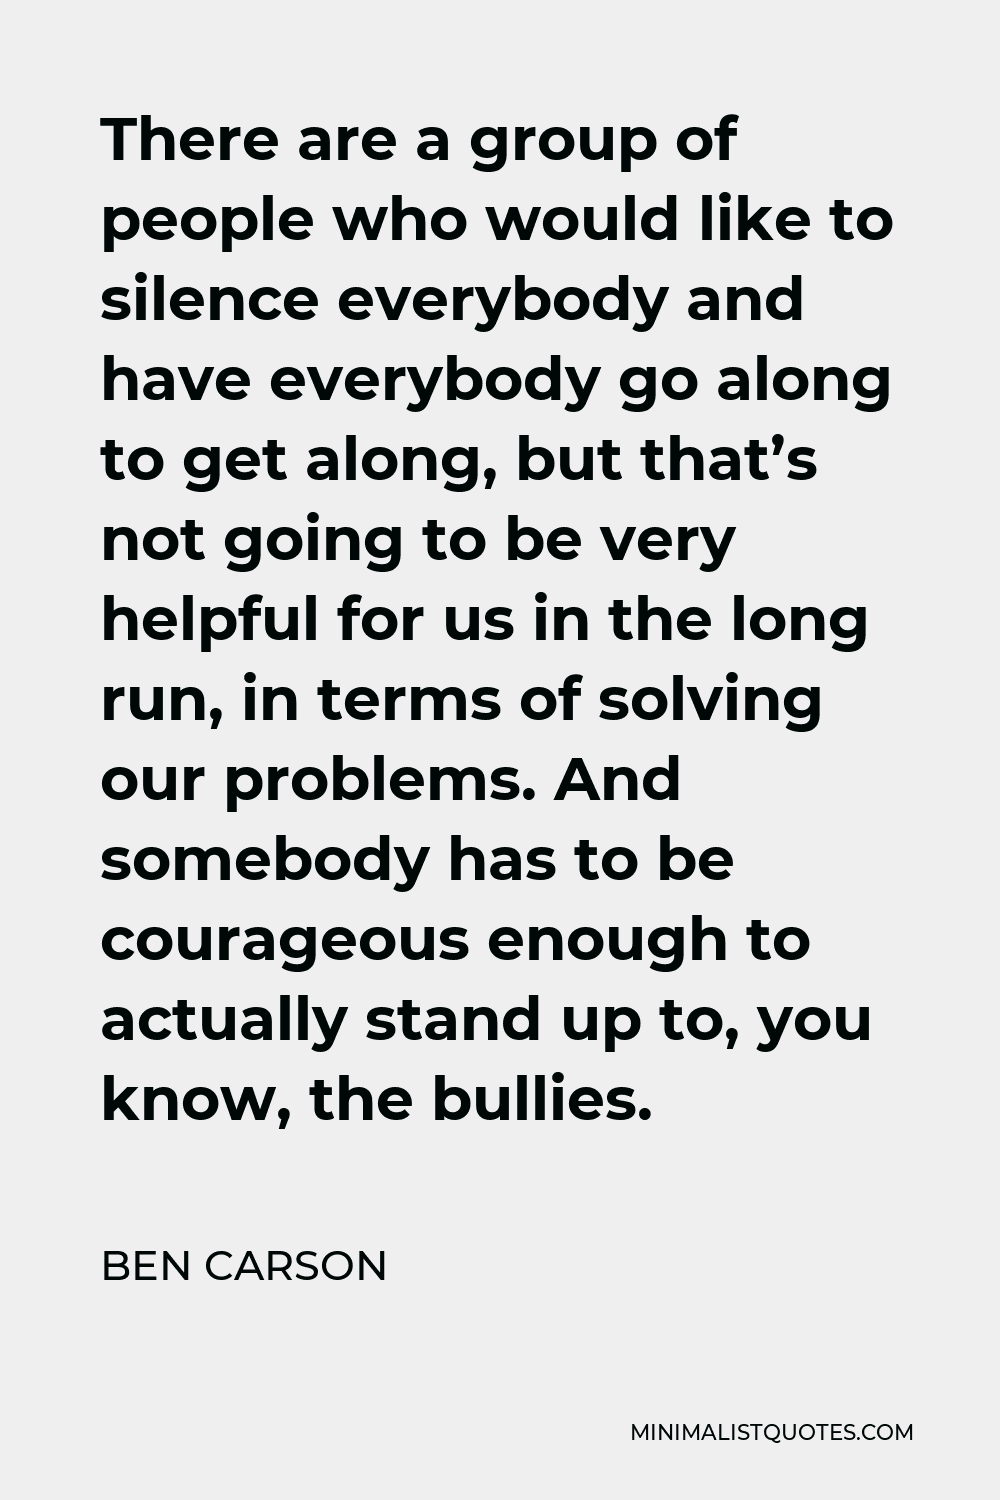 Ben Carson Quote - There are a group of people who would like to silence everybody and have everybody go along to get along, but that’s not going to be very helpful for us in the long run, in terms of solving our problems. And somebody has to be courageous enough to actually stand up to, you know, the bullies.